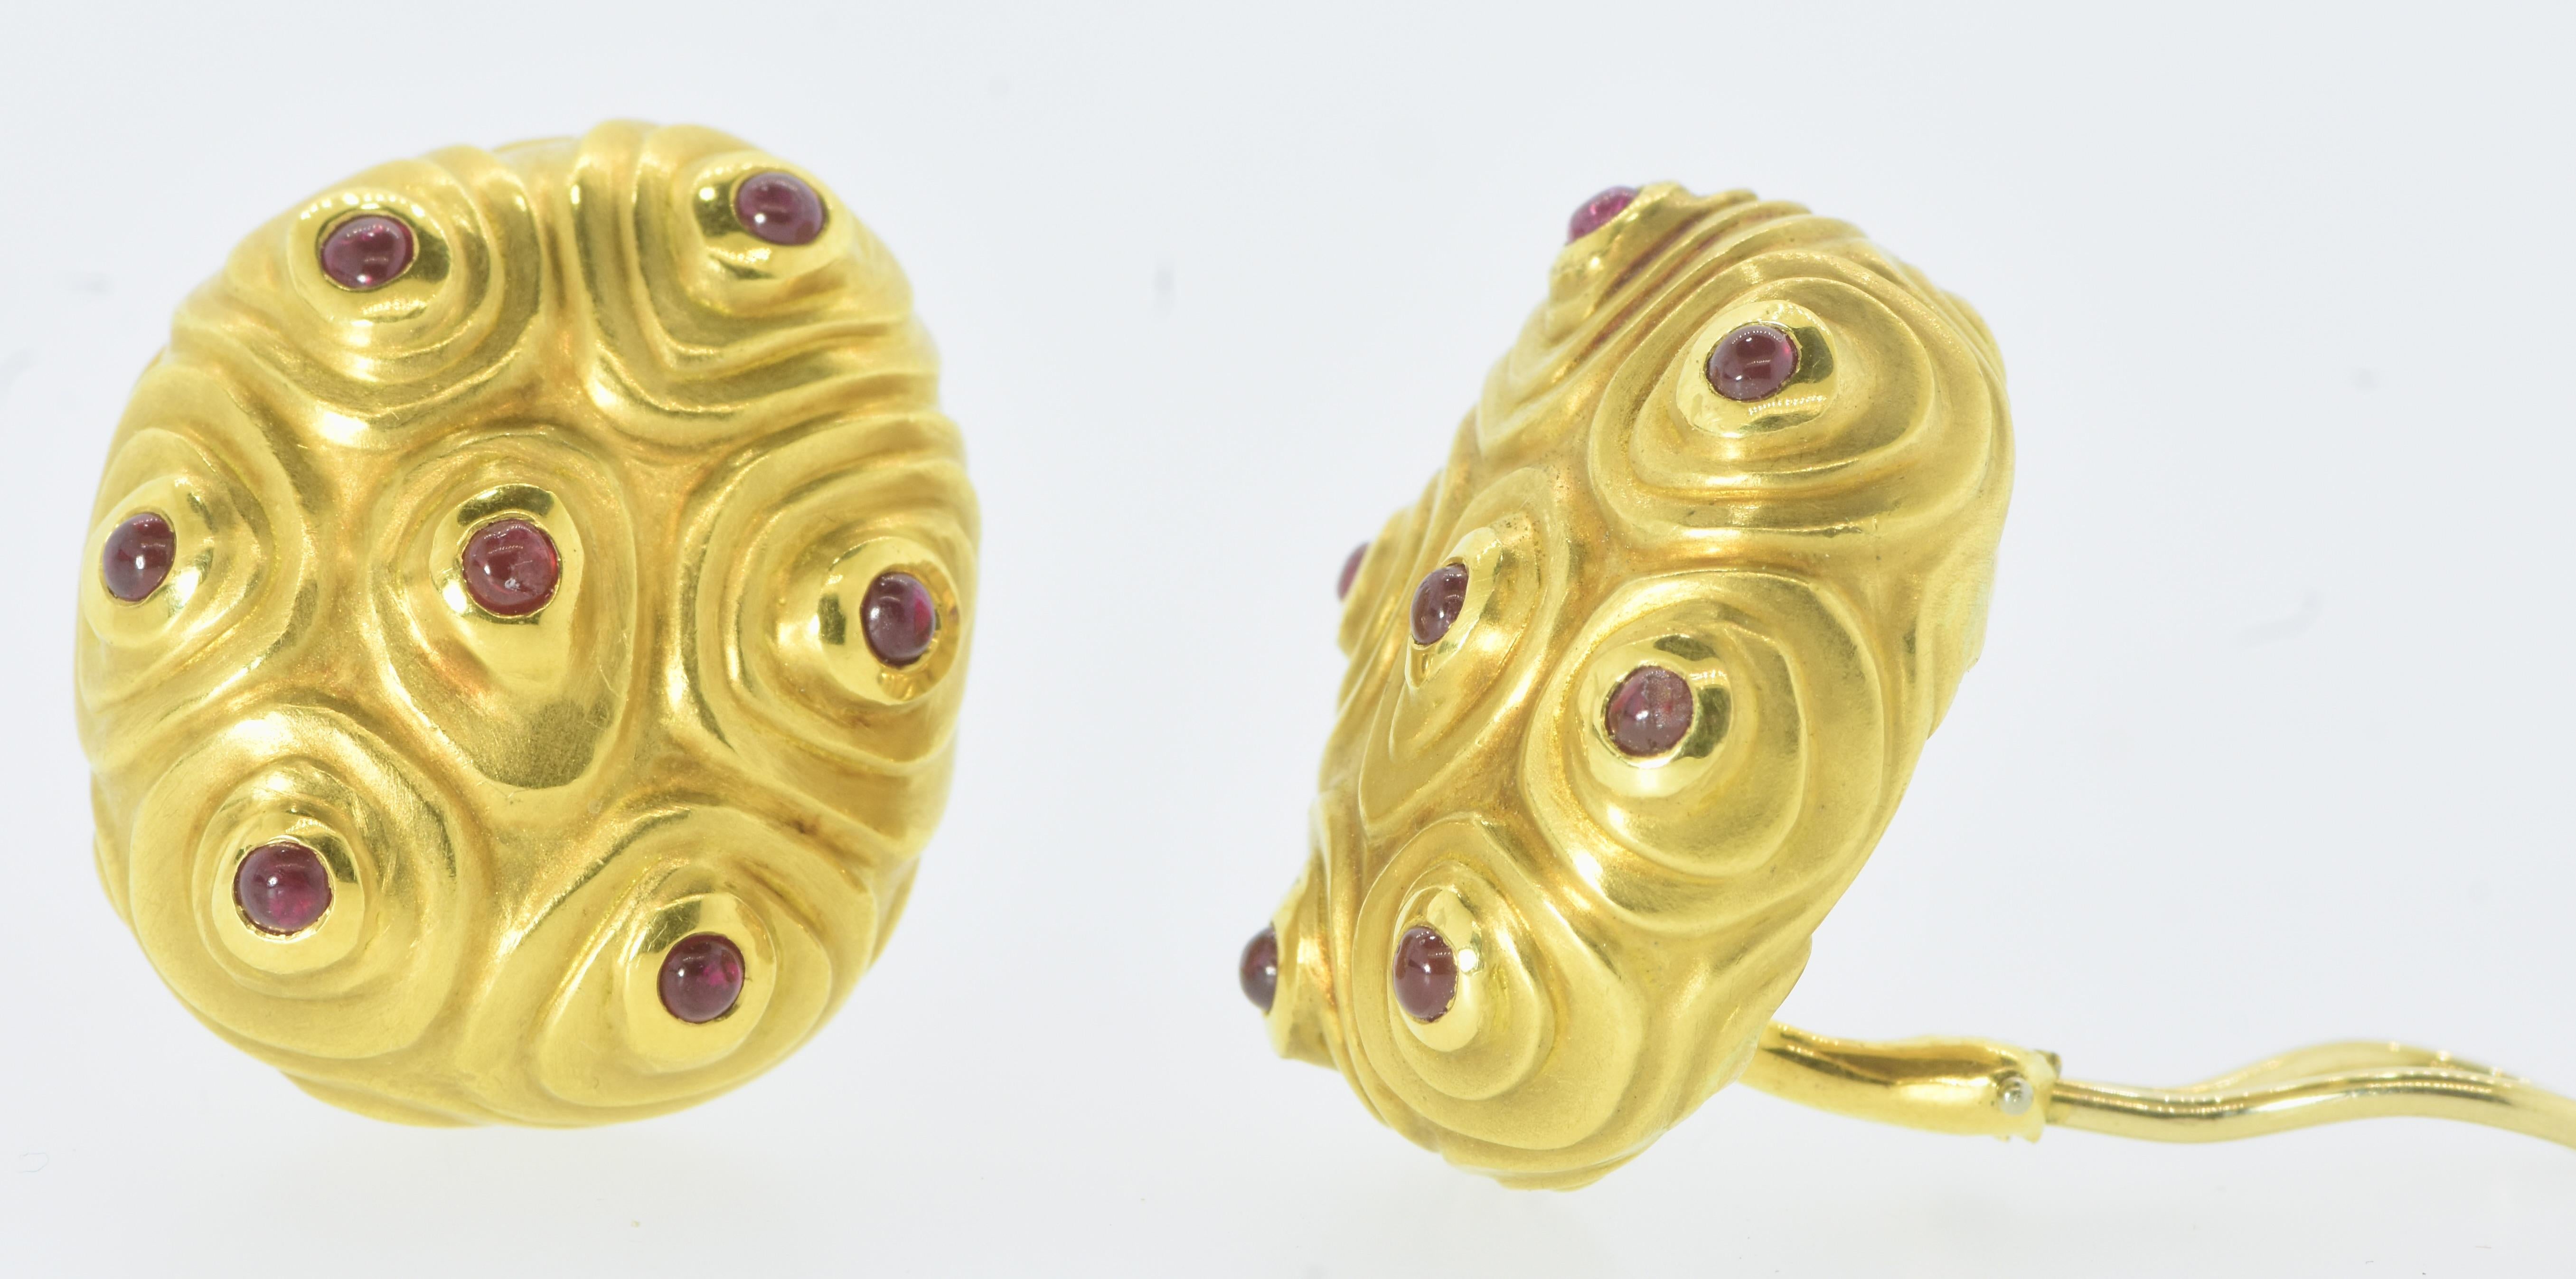 18K yellow gold vintage earrings each with 7 small cabochon circular natural rubies of Burma color, Angela Cummings.  This is the larger model - rarely found.

These are cushion shaped bulbous ear clips weighing exactly 38.5 grams. Their length is